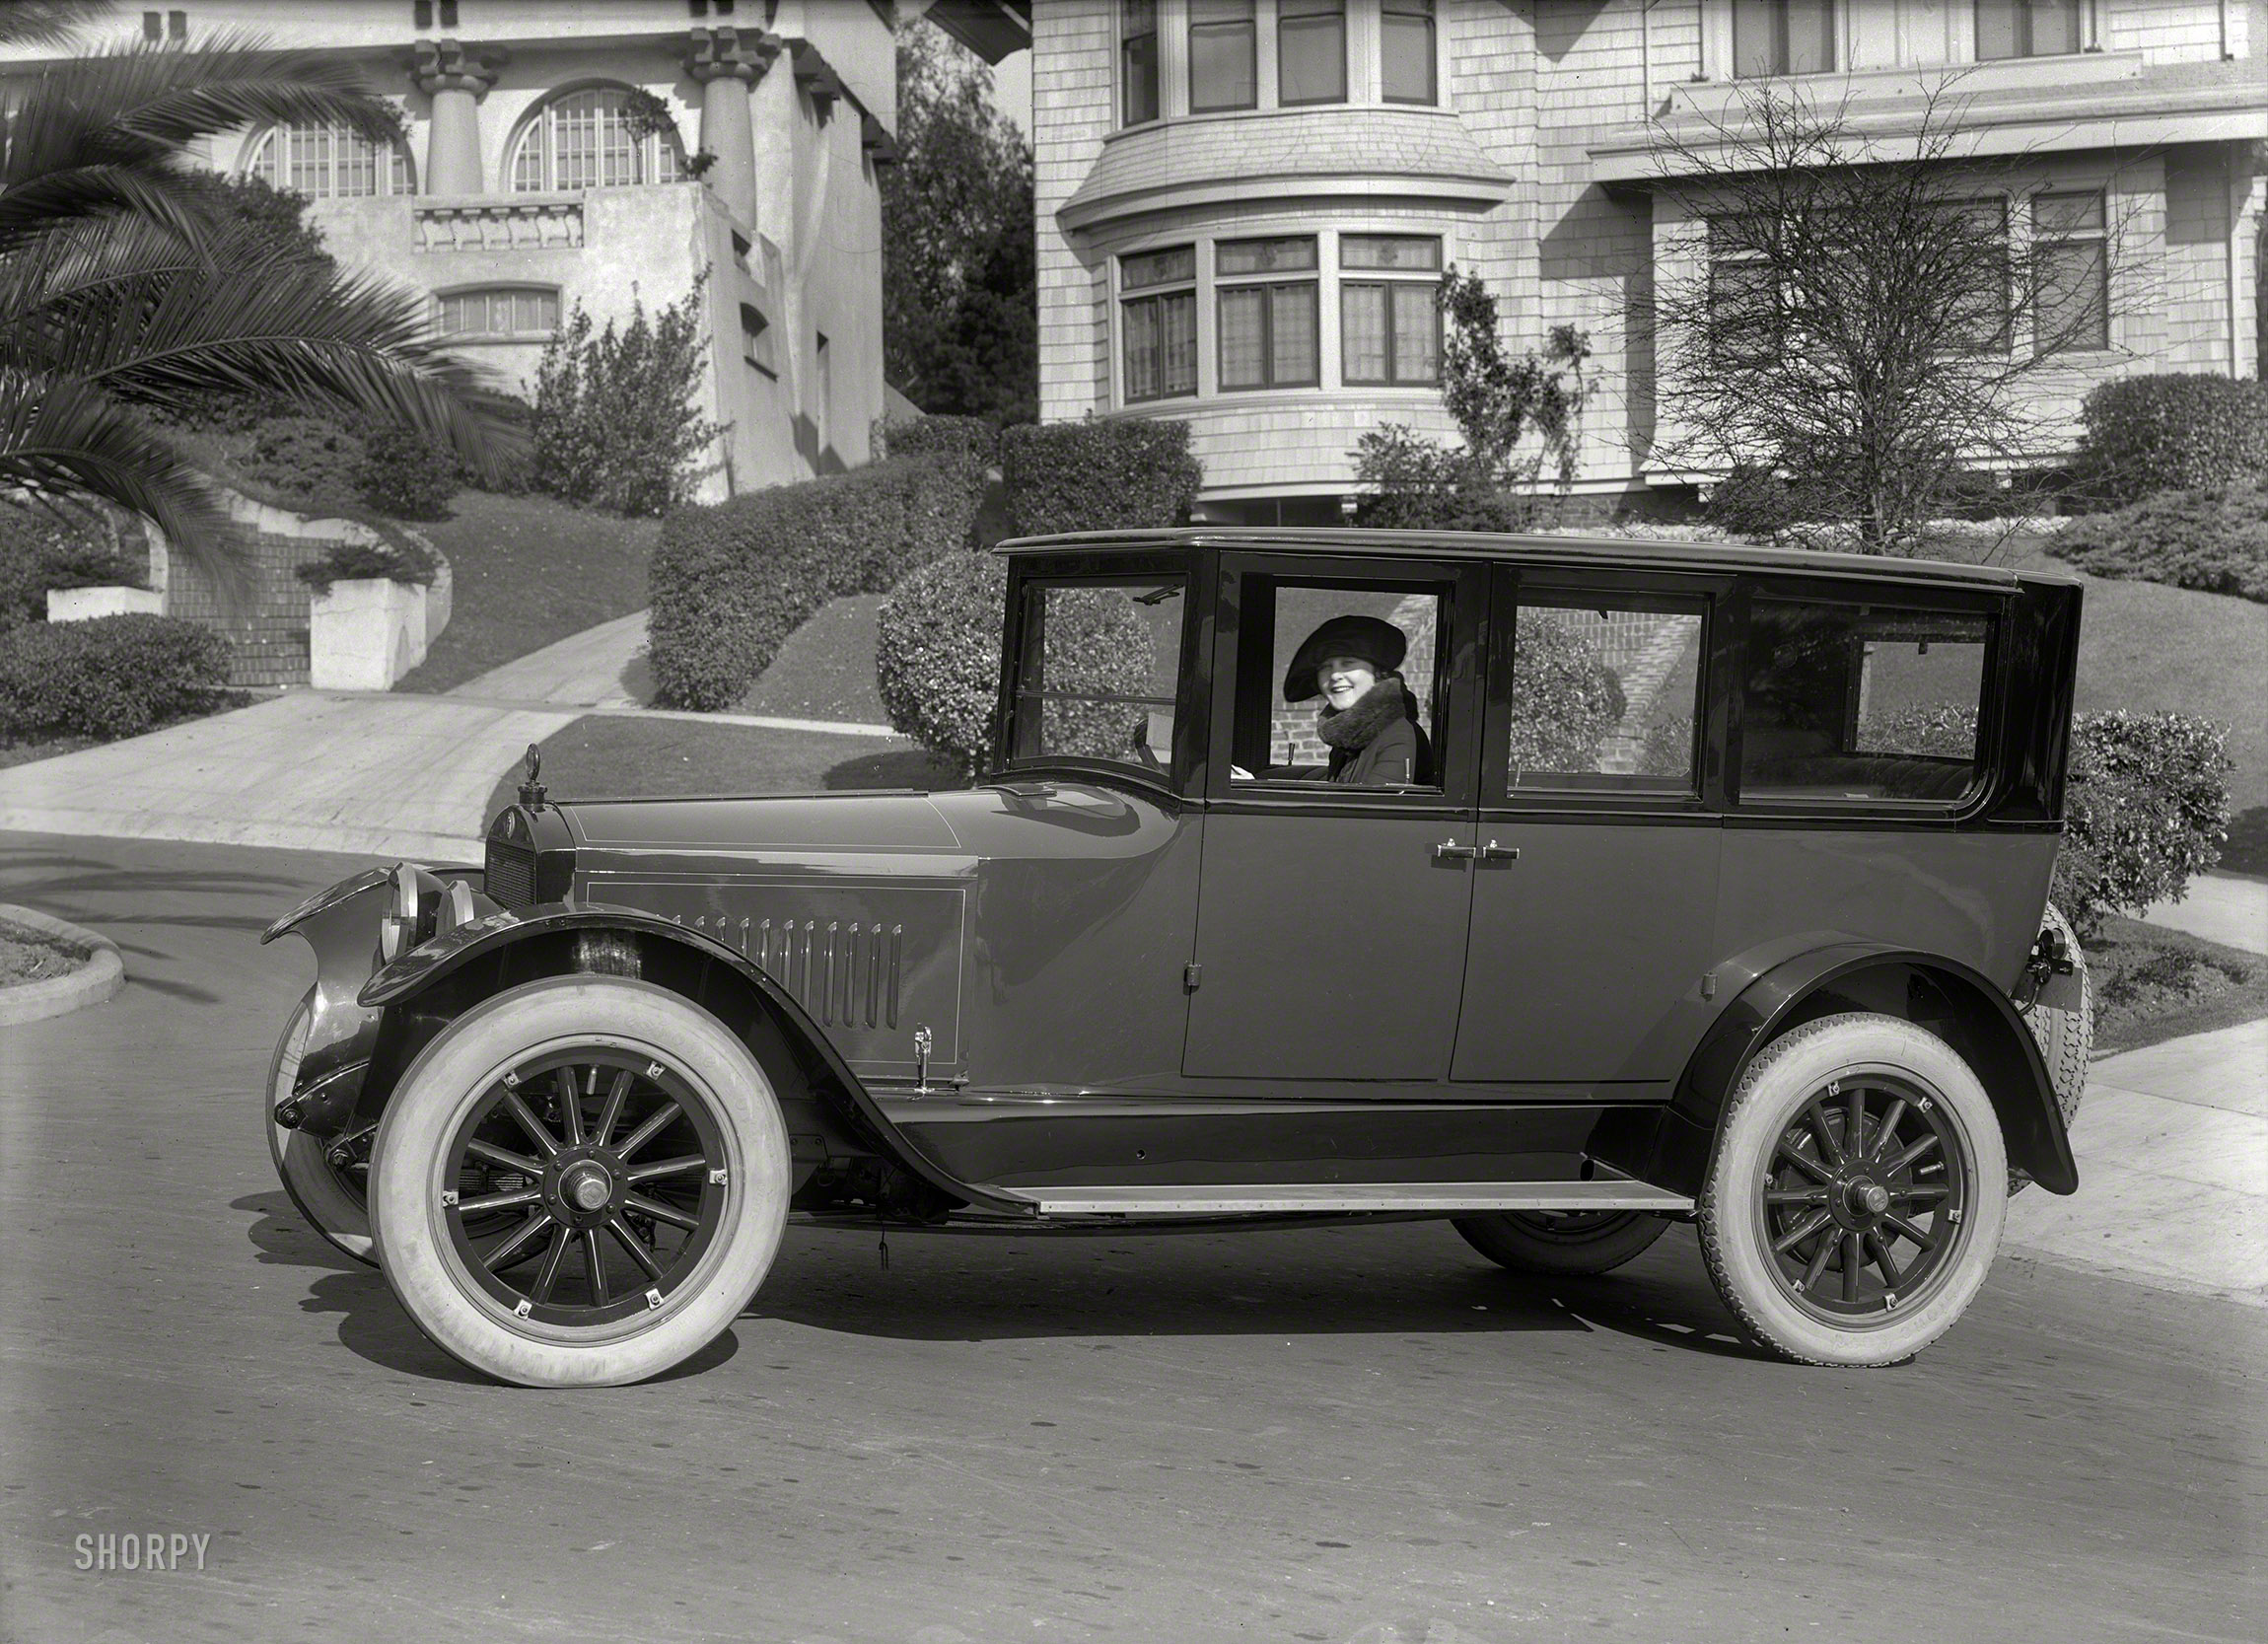 San Francisco circa 1921. "Standard Eight sedan." The chic chariot last glimpsed here. 5x7 inch glass negative by Christopher Helin. View full size.